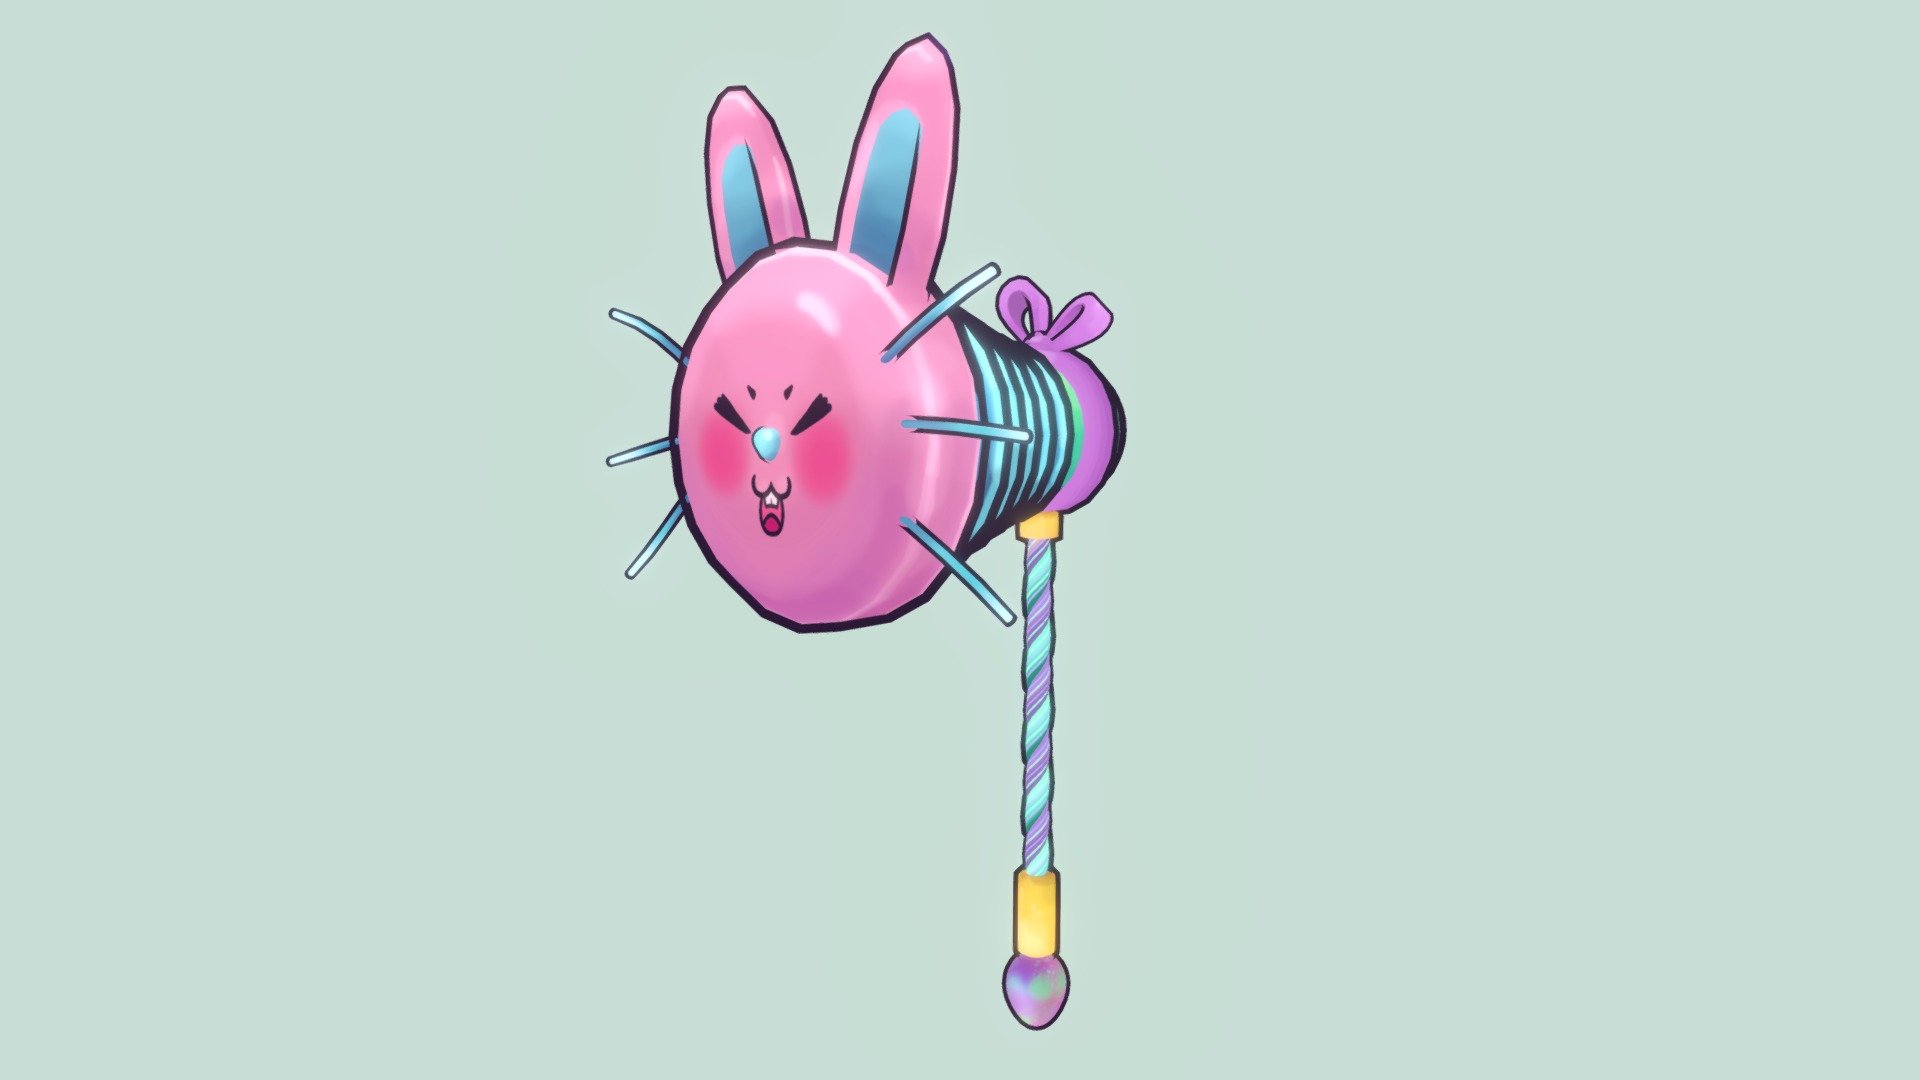 Hold onto your carrots folks, as The Super Bunny Bounce Mallet 🐰✨has arrived! Wack away any worry that puts a rain cloud on your sunny day, and enjoy it's full functional wonderful wackiness! Patent pending for the Sketchfab Non-Violent Weapon Challenge!!! #WeaponChallenge - Super Bunny Bounce Mallet 🐰✨ - 3D model by CourtneyFayM (@CourtneyFairytaleArt) 3d model